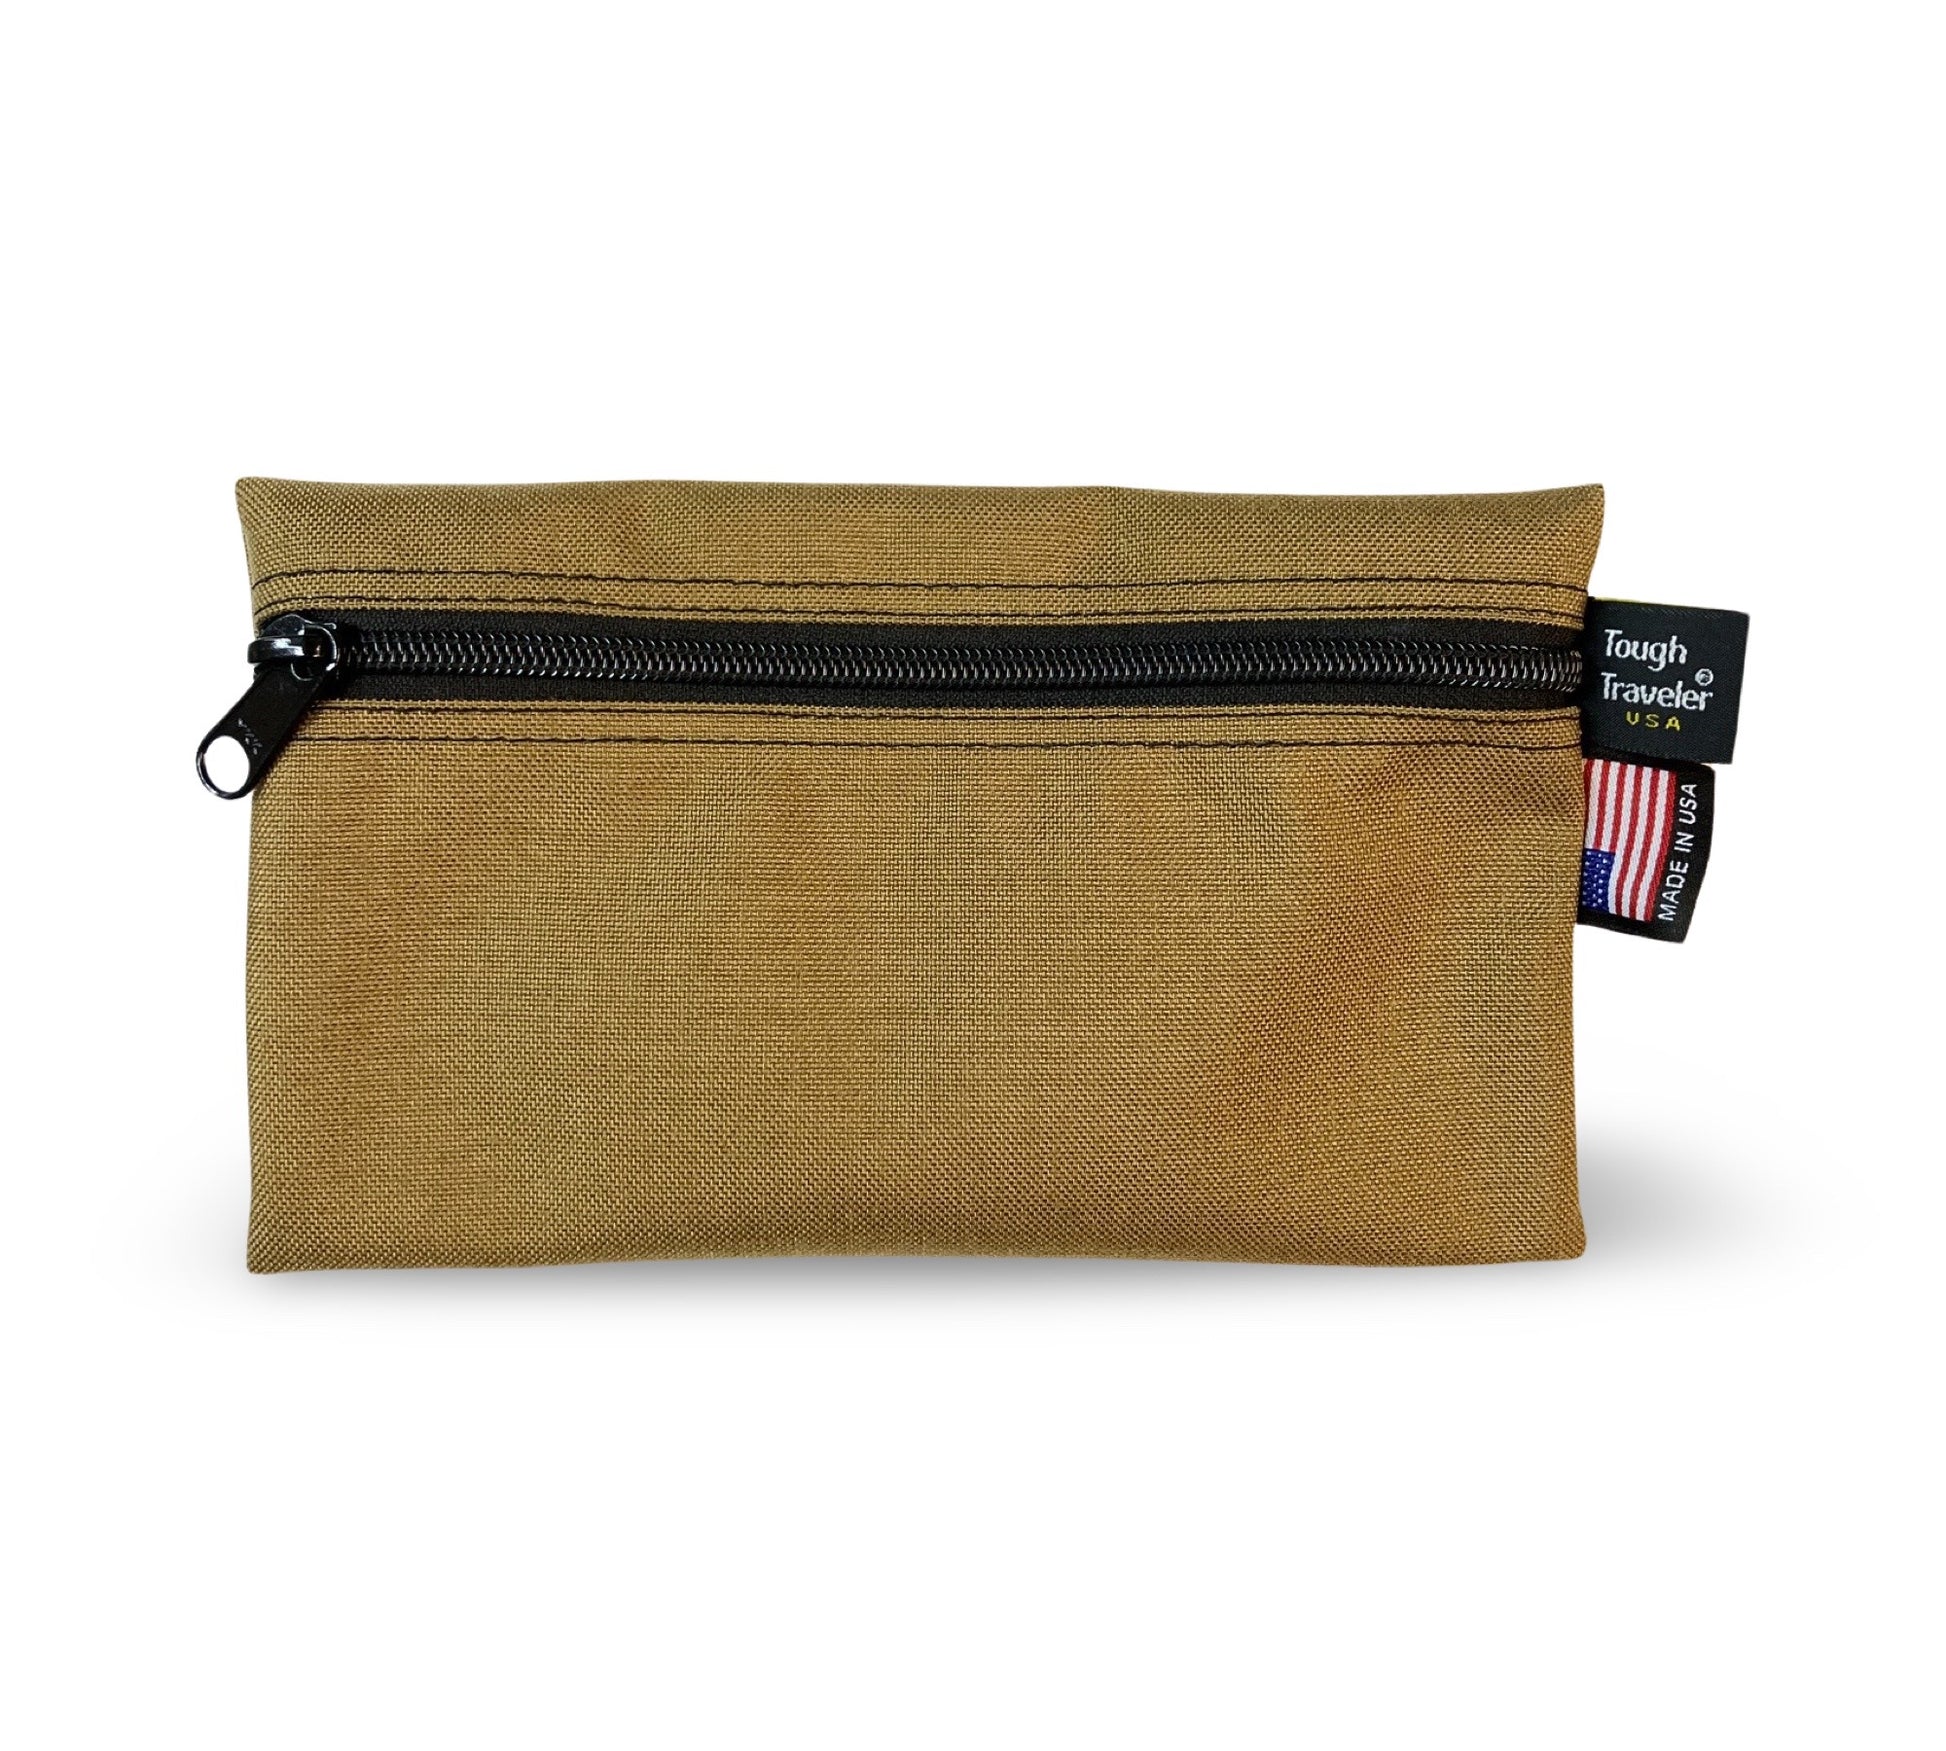 Custom Small Canvas Pencil Case - Design Pouches Online at